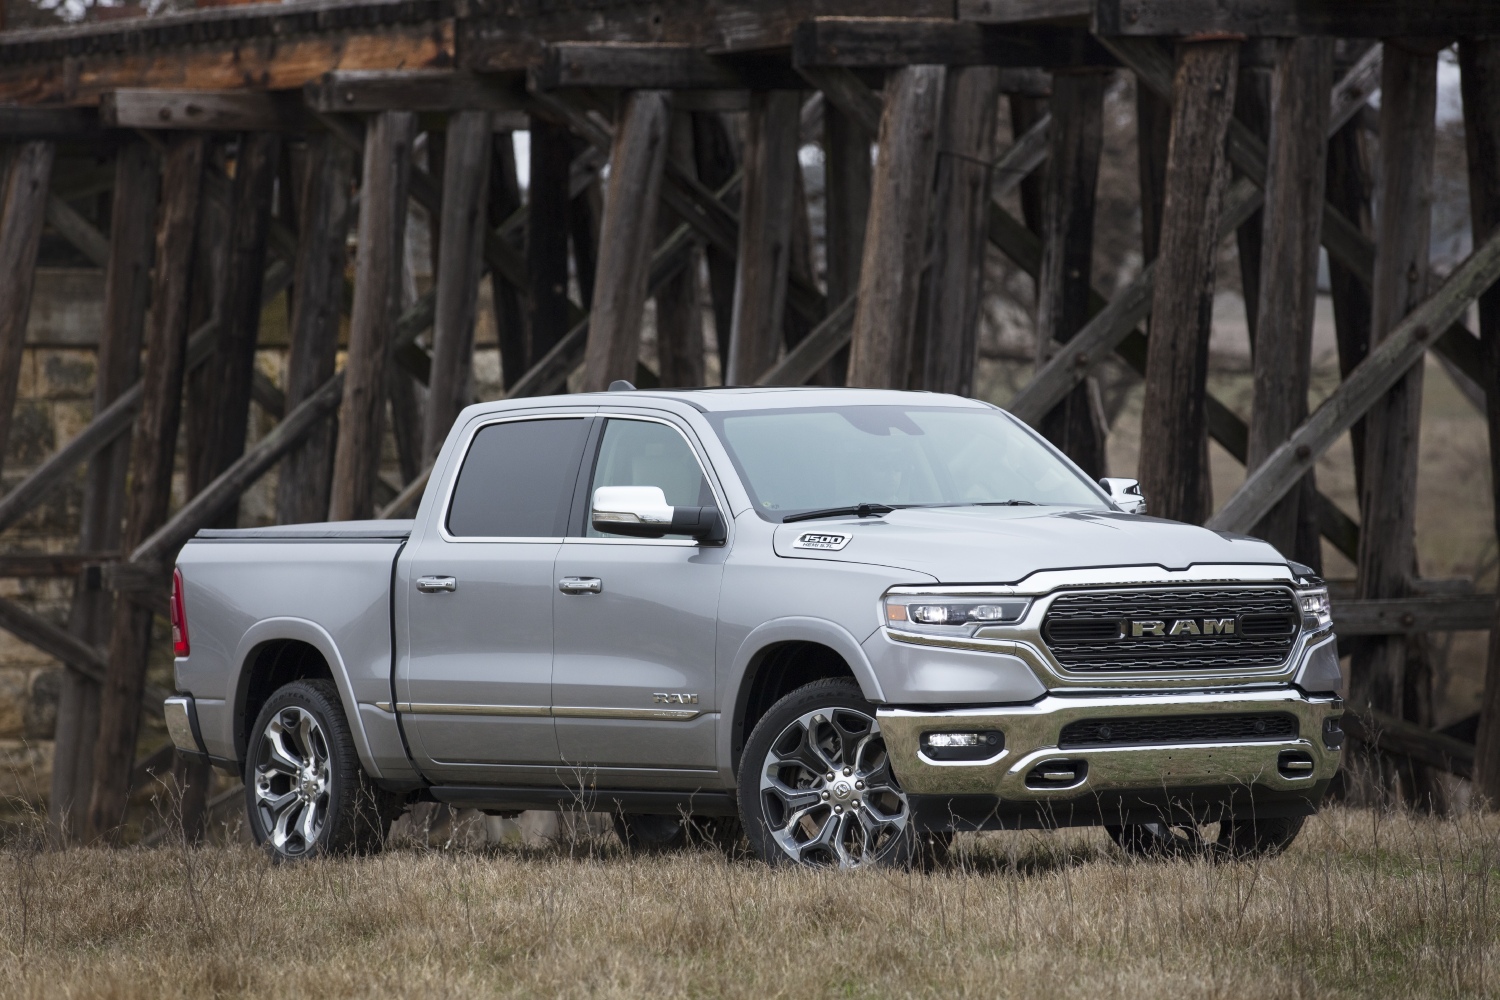 The best used full-size trucks over $25,000 include this Ram 1500